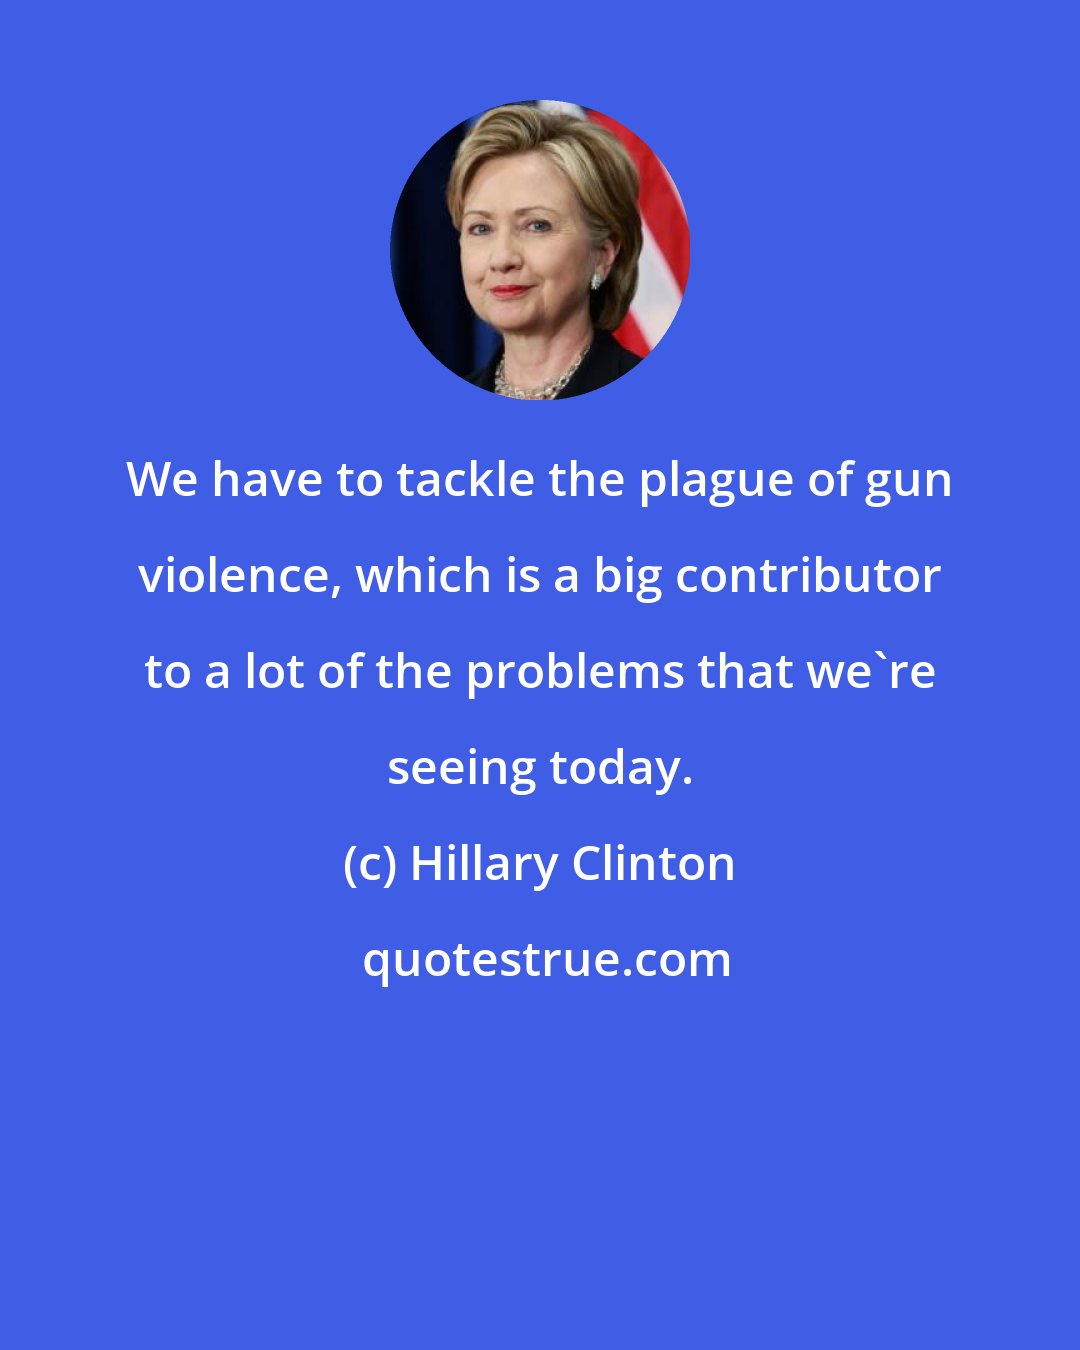 Hillary Clinton: We have to tackle the plague of gun violence, which is a big contributor to a lot of the problems that we're seeing today.